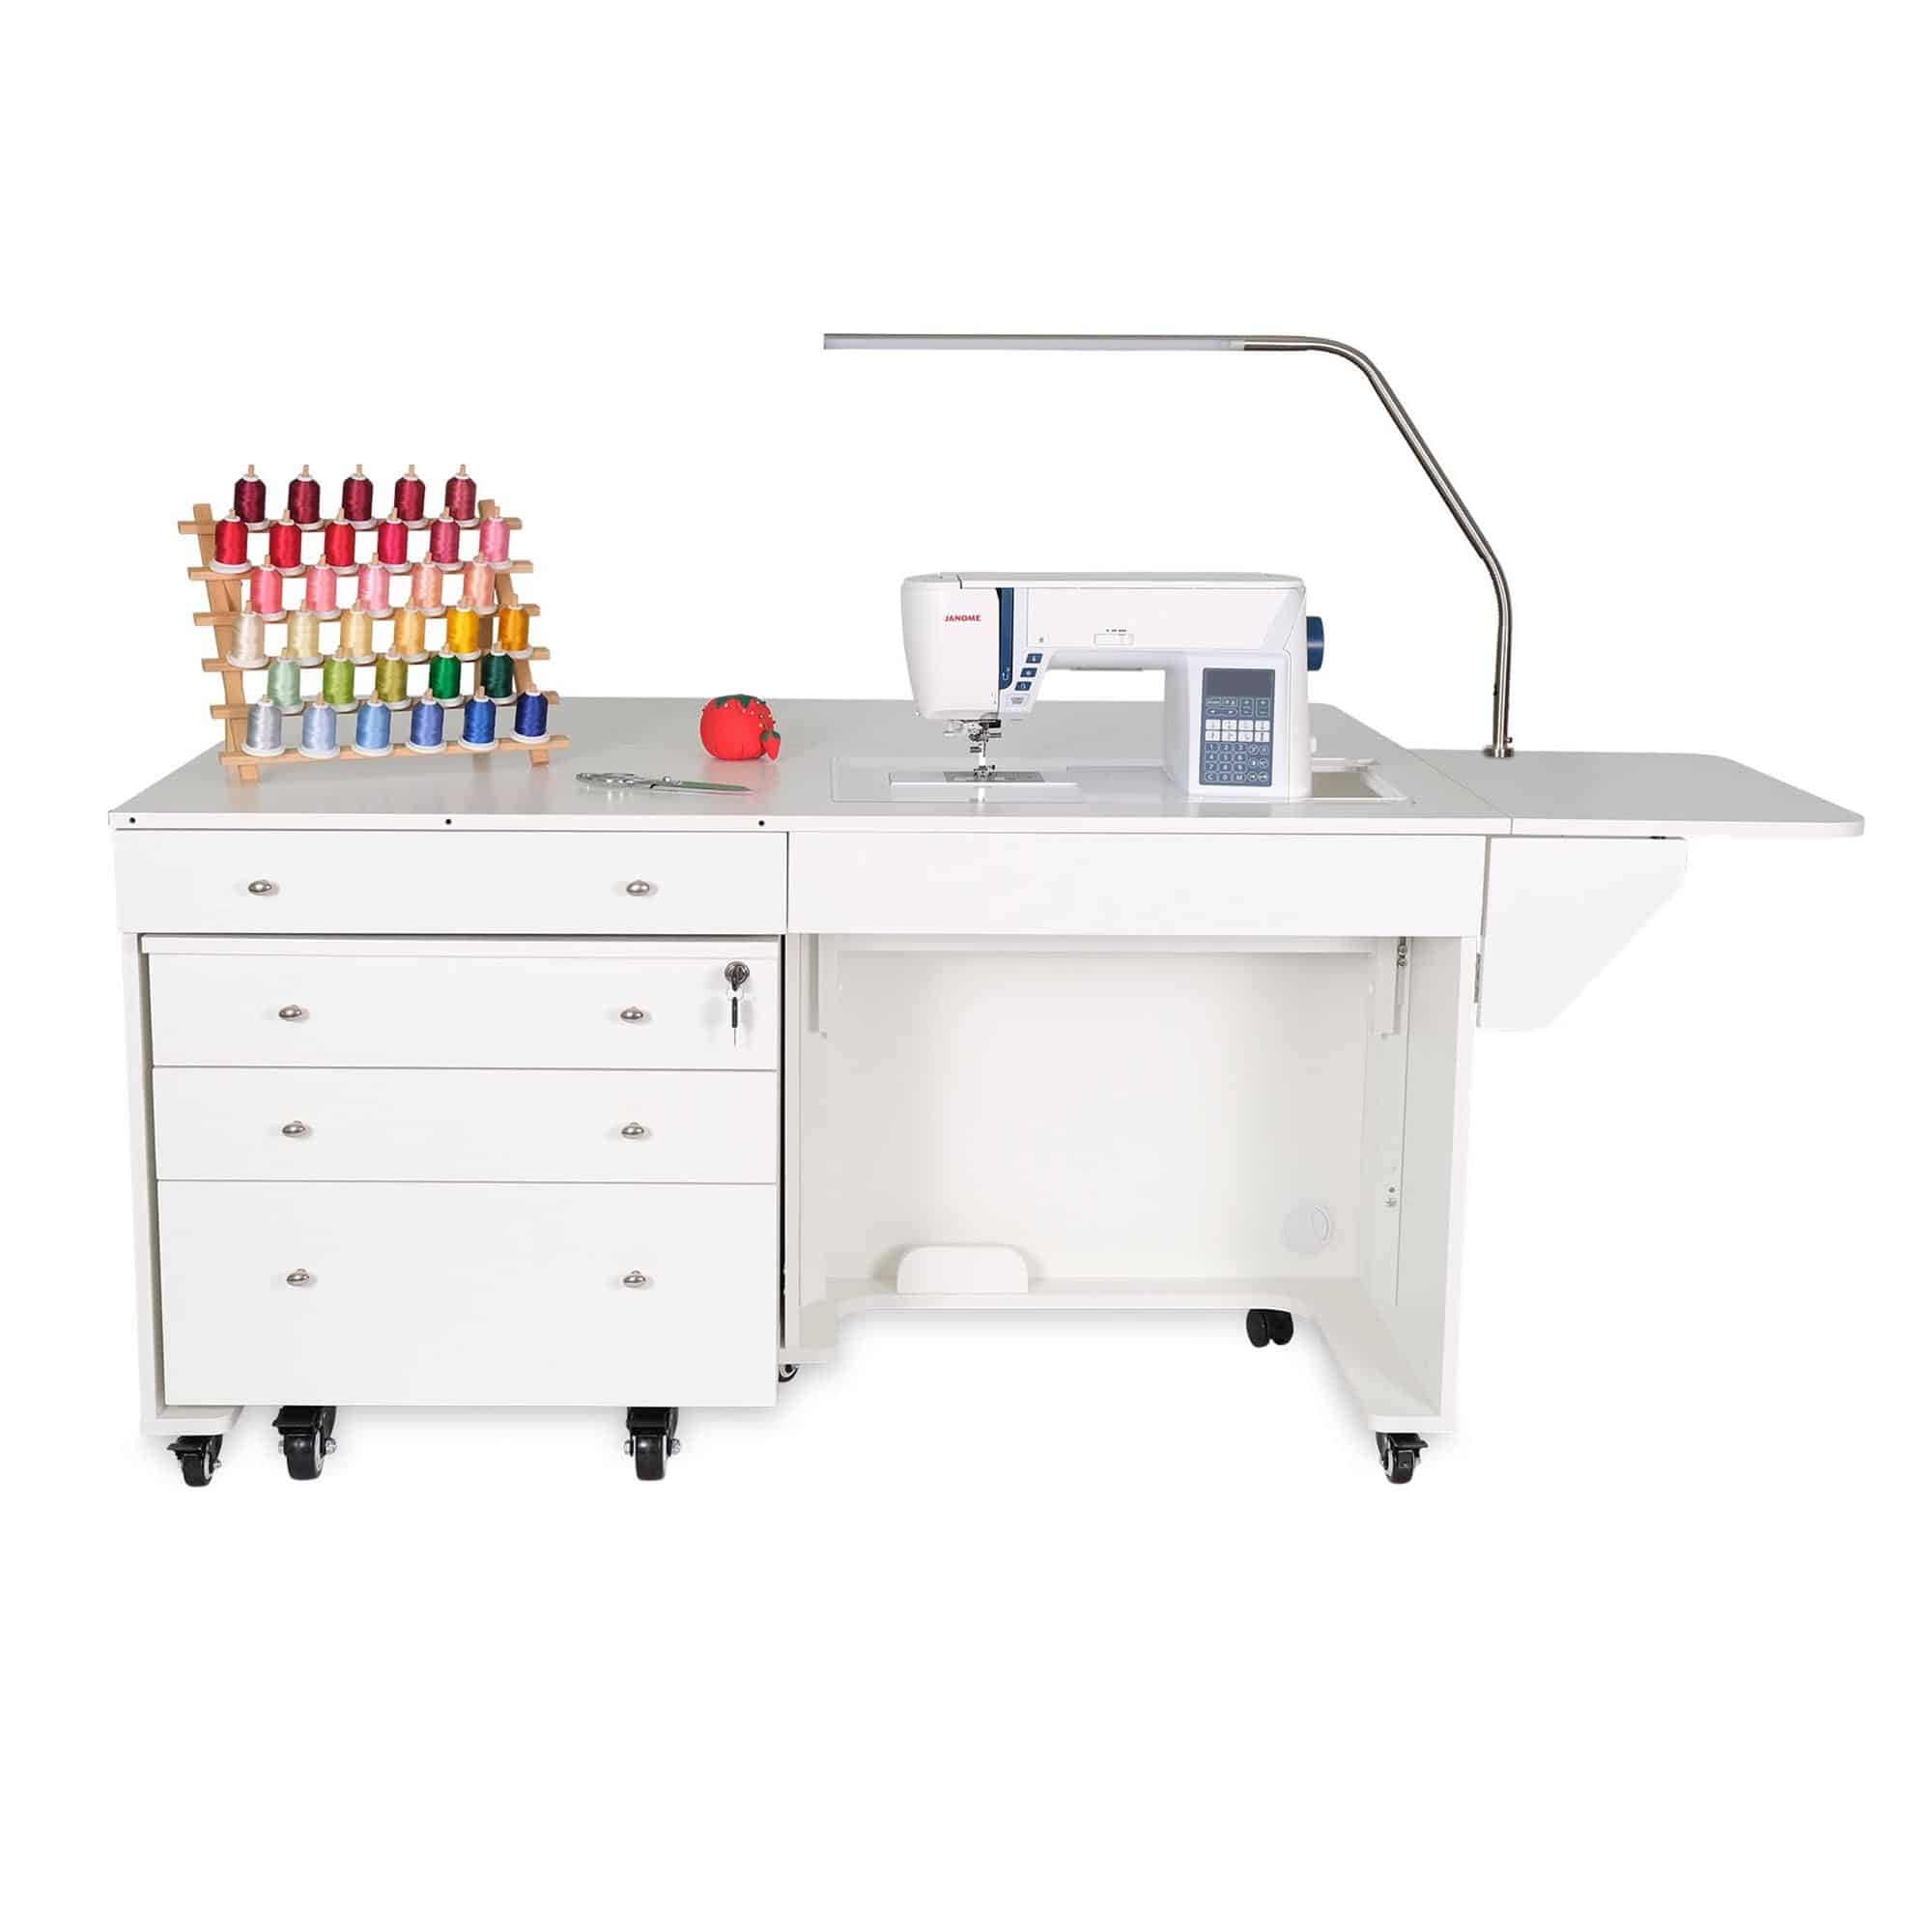 Kangaroo & Joey is a signature full-size sewing cabinet by Kangaroo Sewing Furniture featuring a 3-position hydraulic lift, available at Arrow Sewing Furniture.